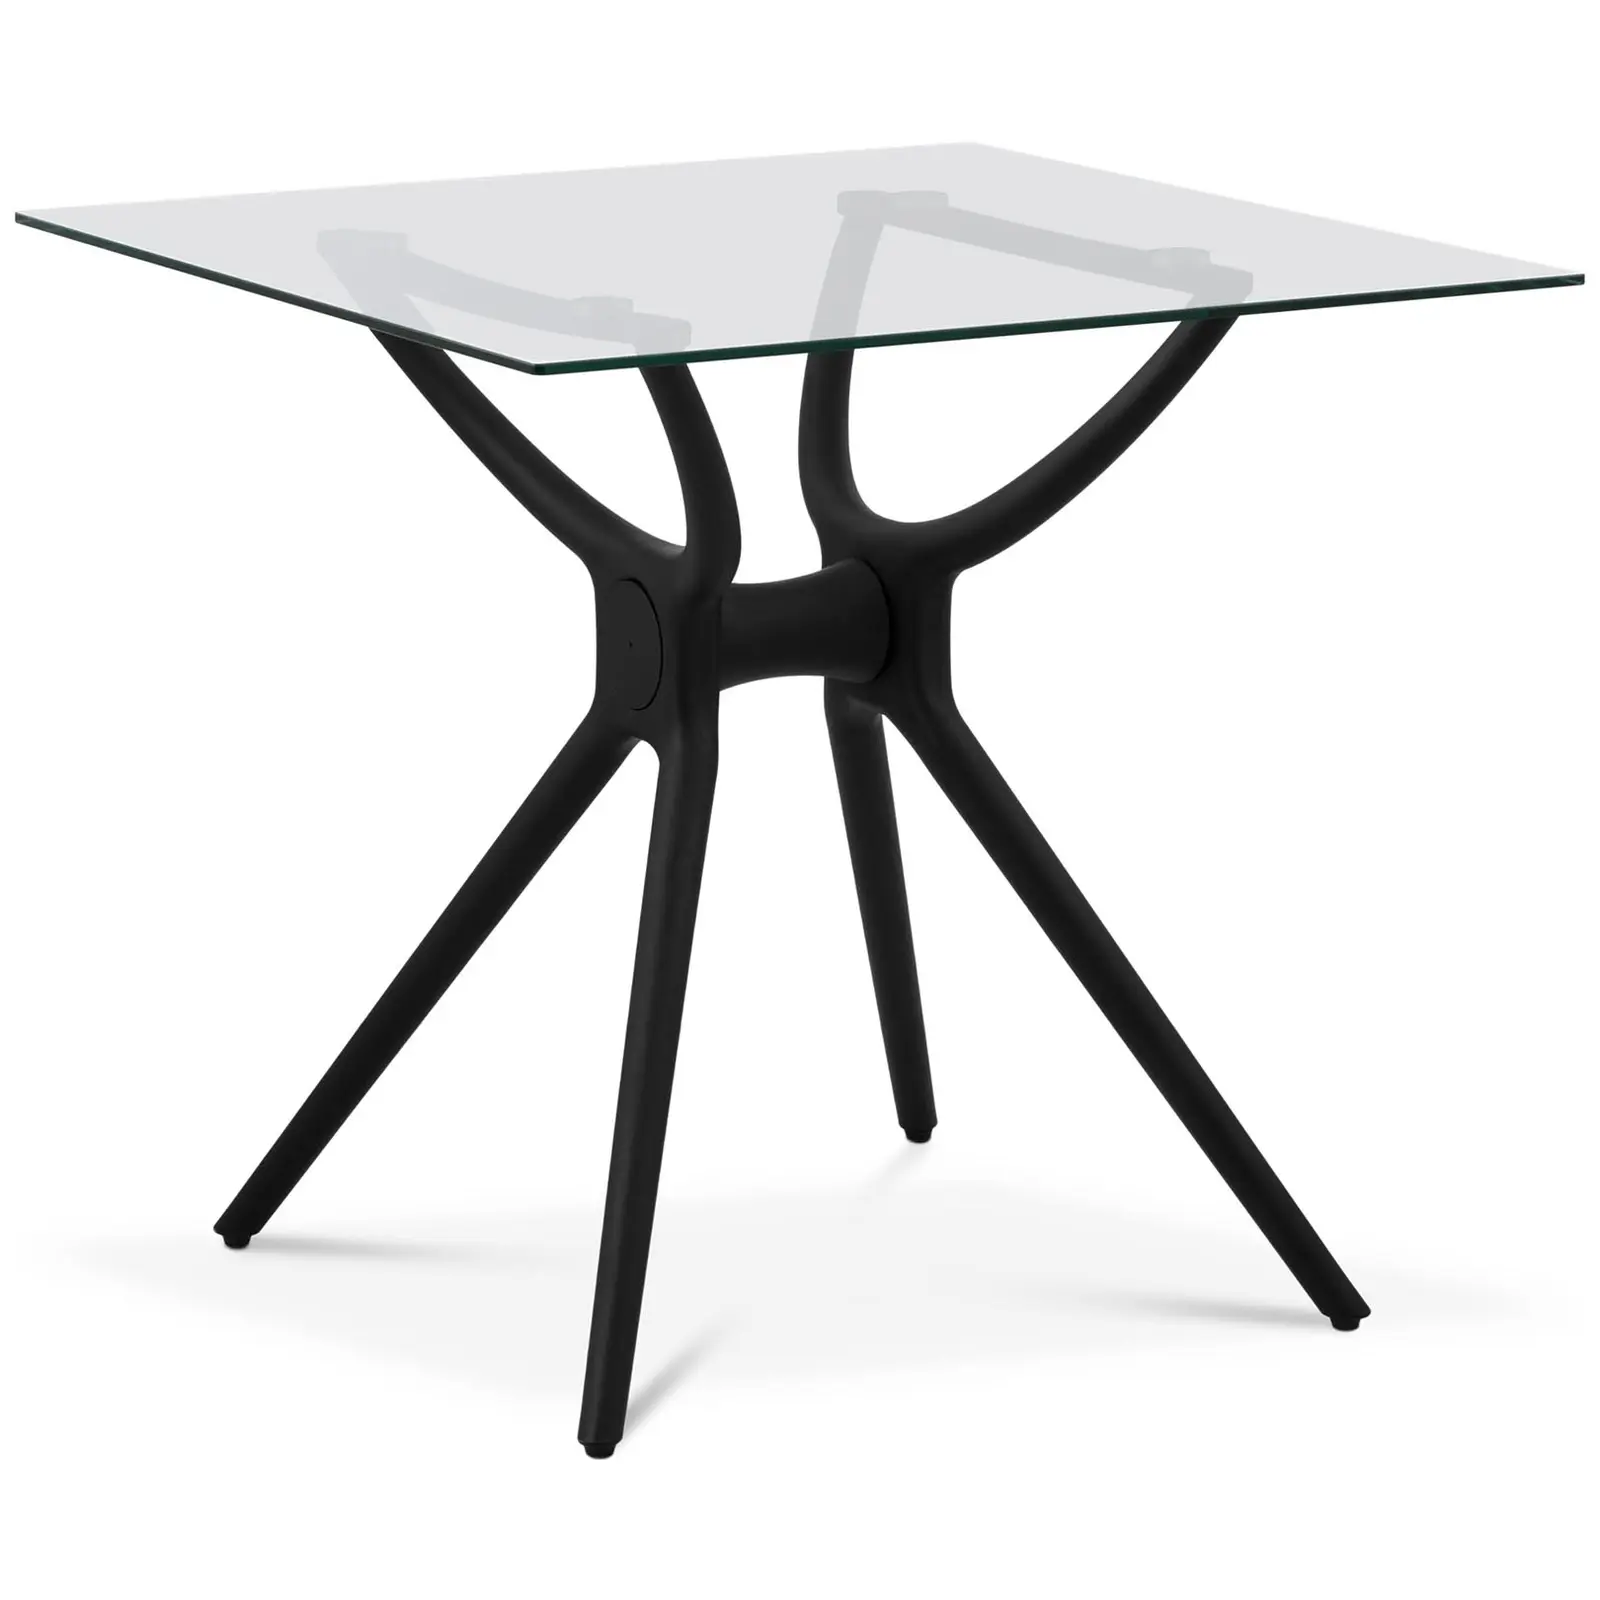 Factory second Table - square - 80 x 80 cm - glass top